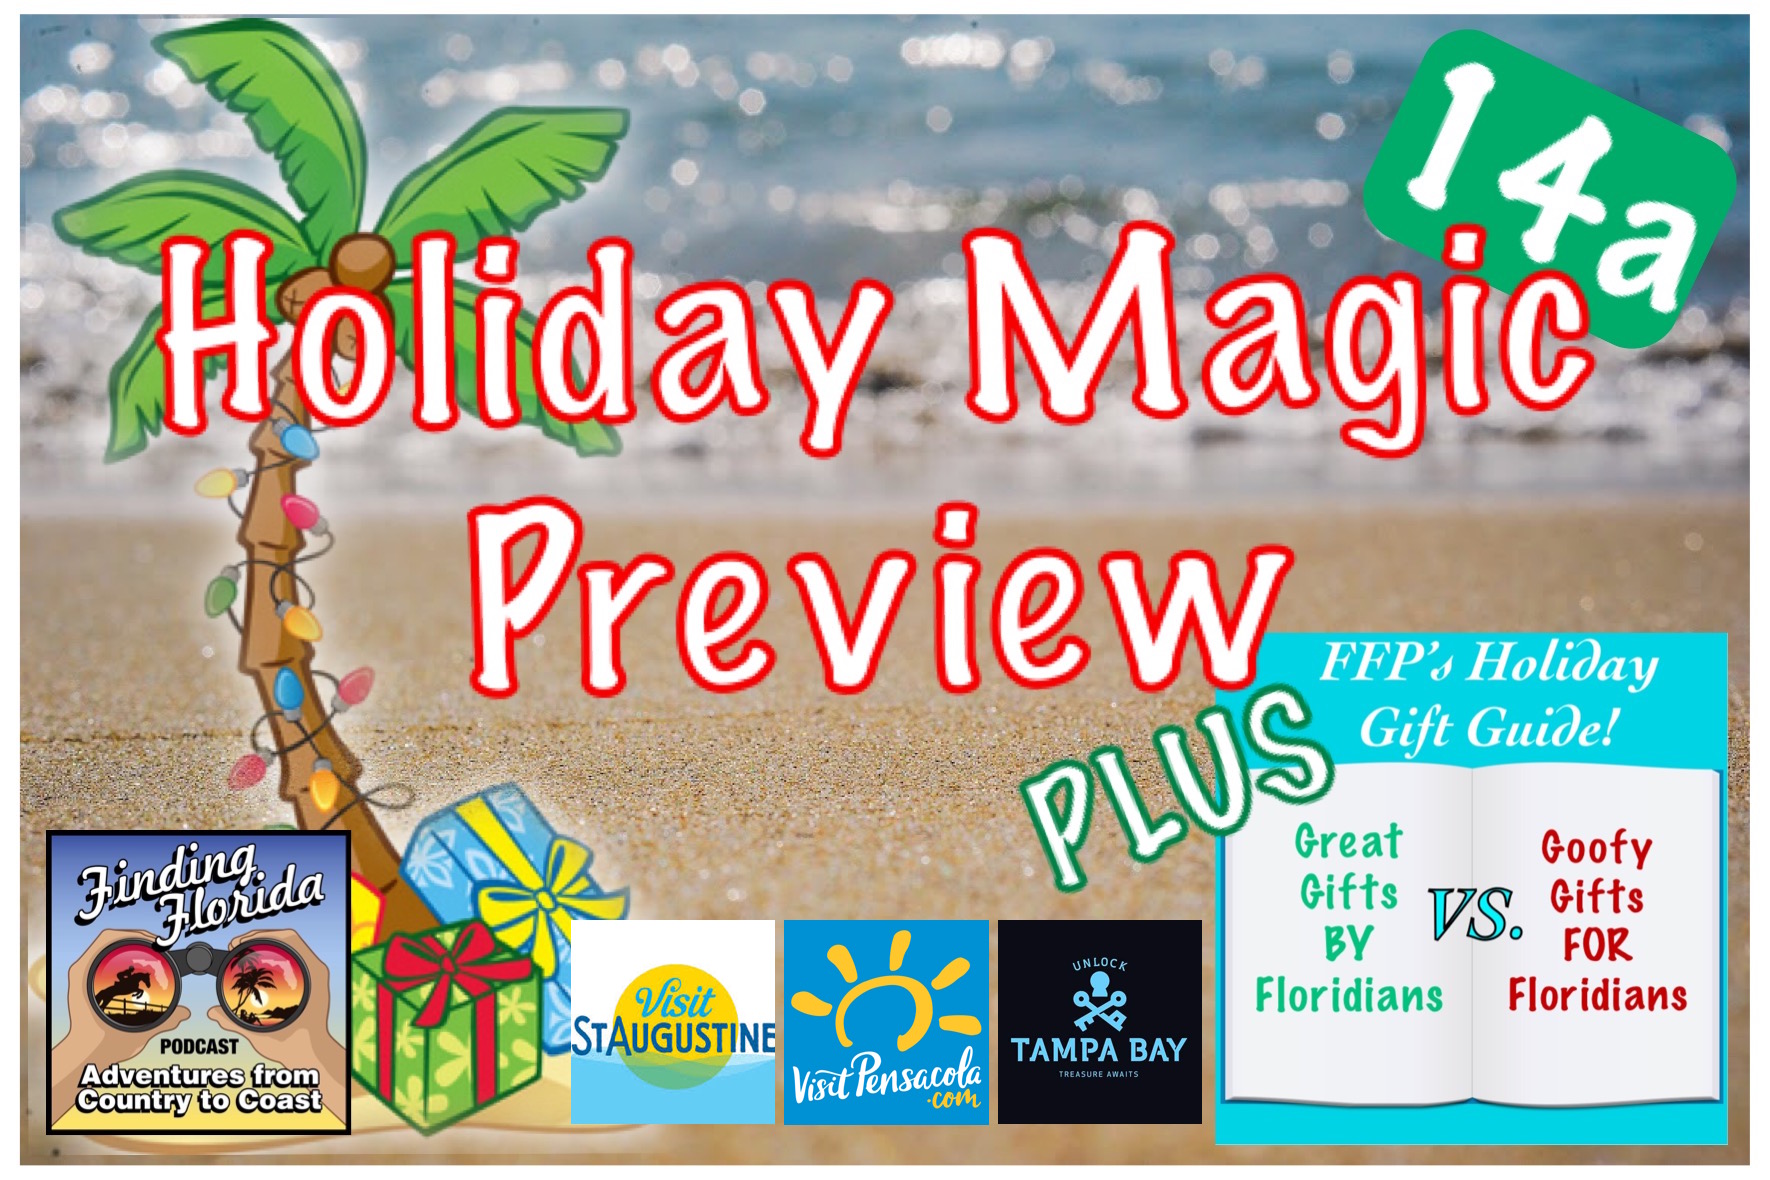 Holidays in St. Augustine, Pensacola, and Tampa Bay; Plus Great Gifts BY Floridians and Goofy Gifts FOR Floridians